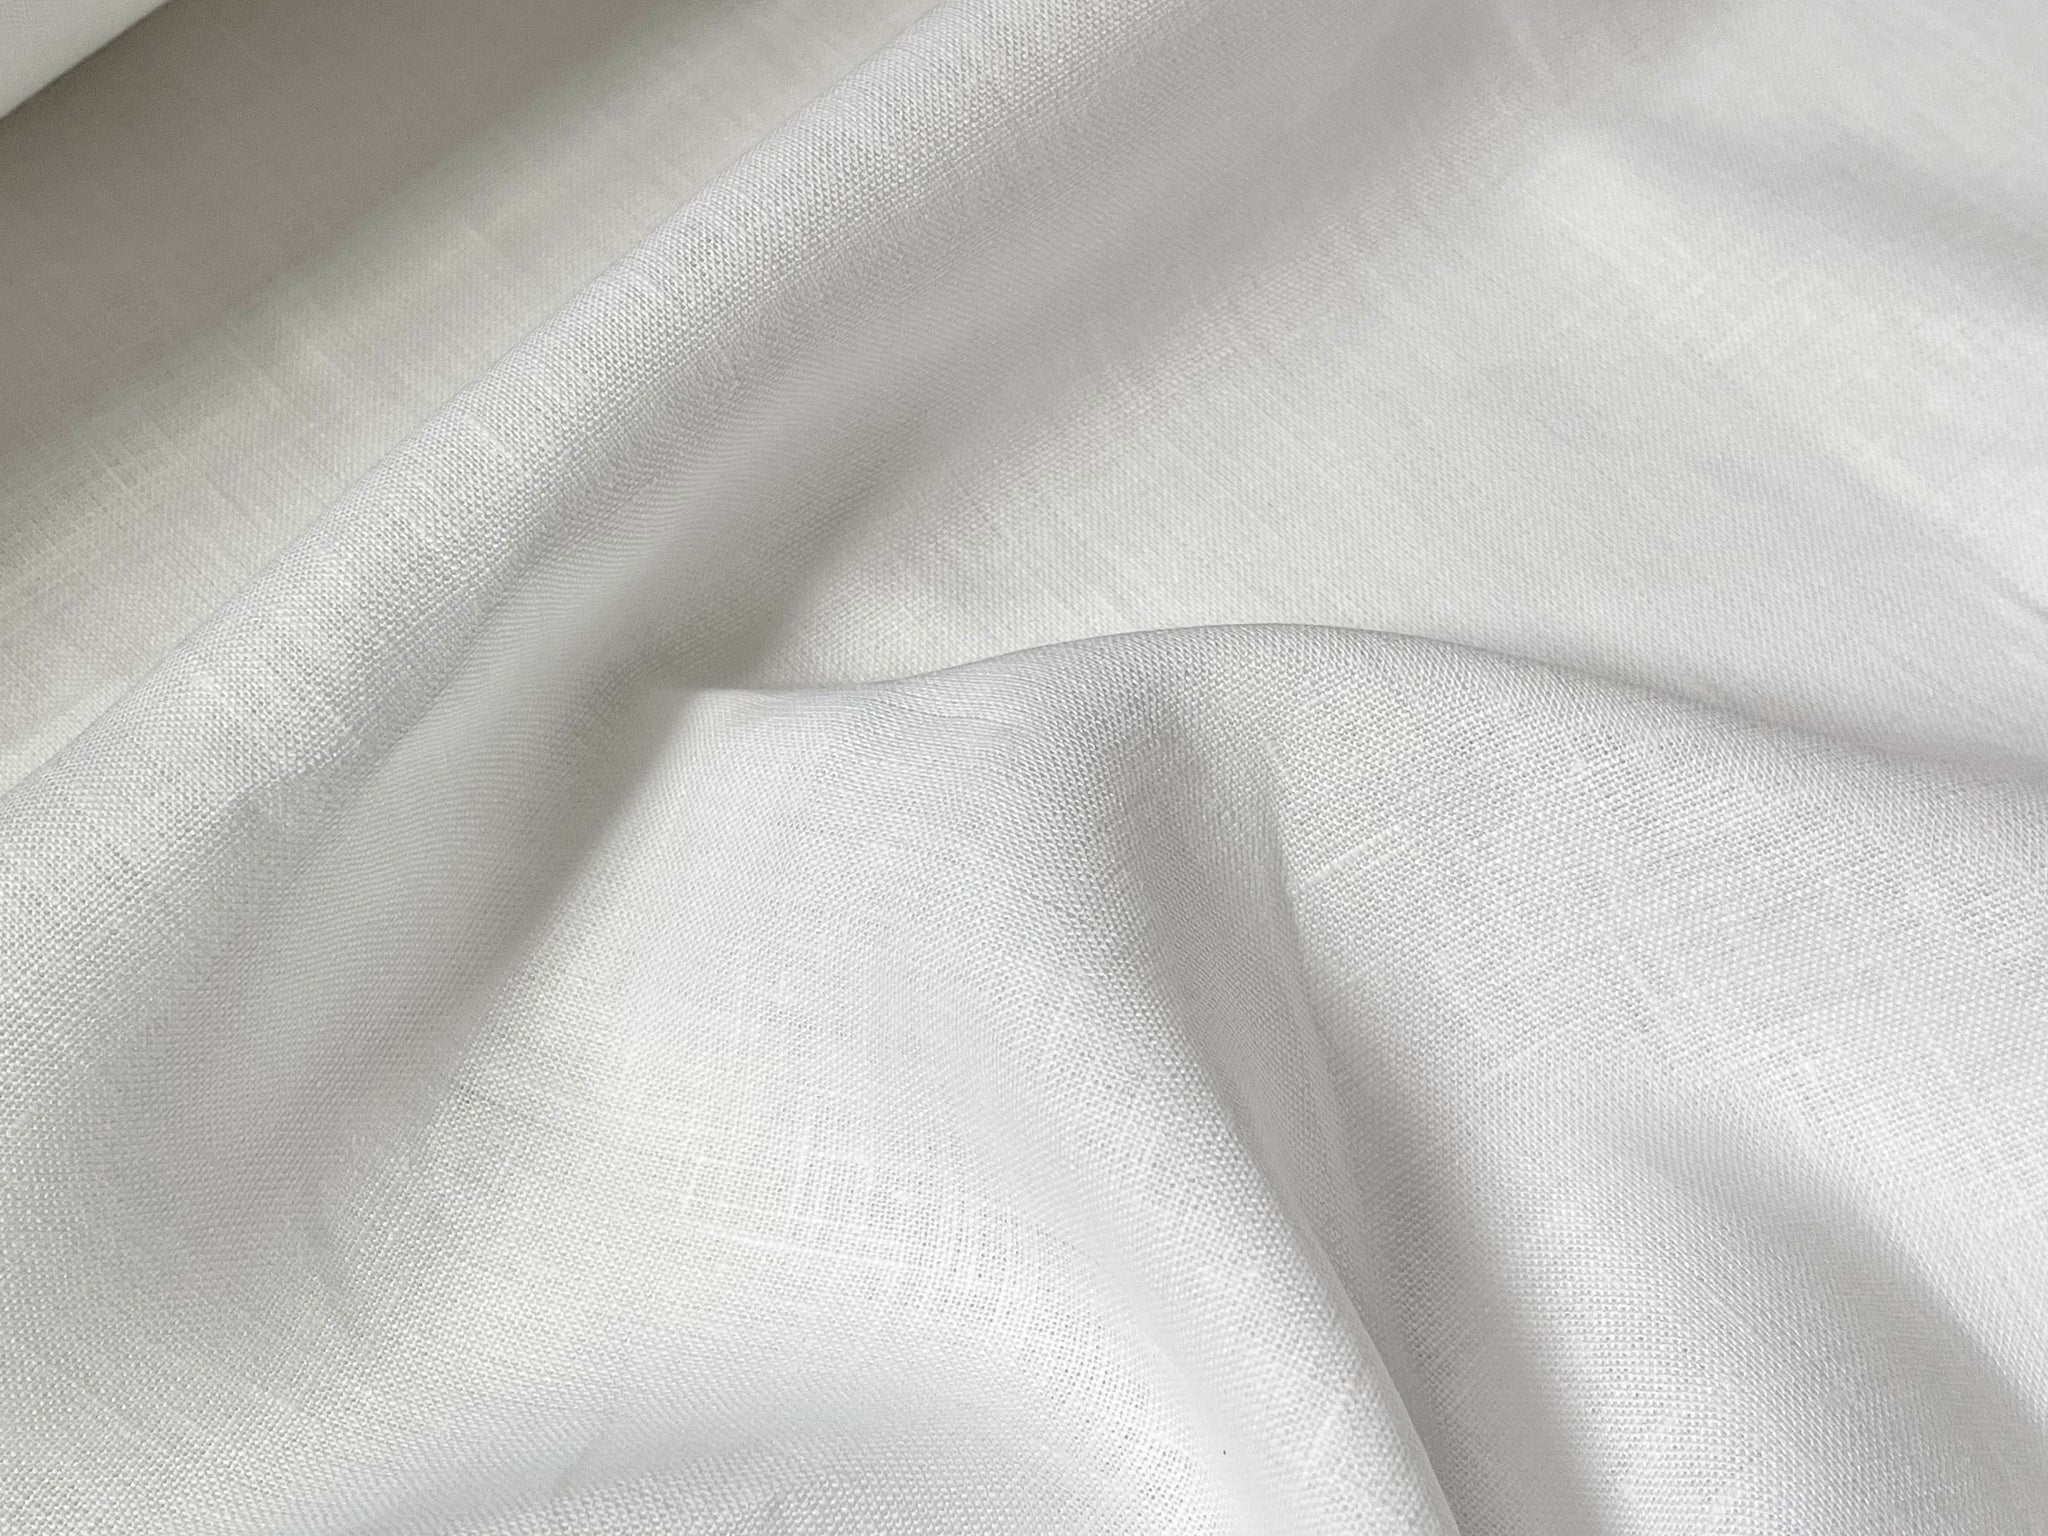 Amaril Pure White Cotton fabric by Ada & Ina Natural Fabrics Collection